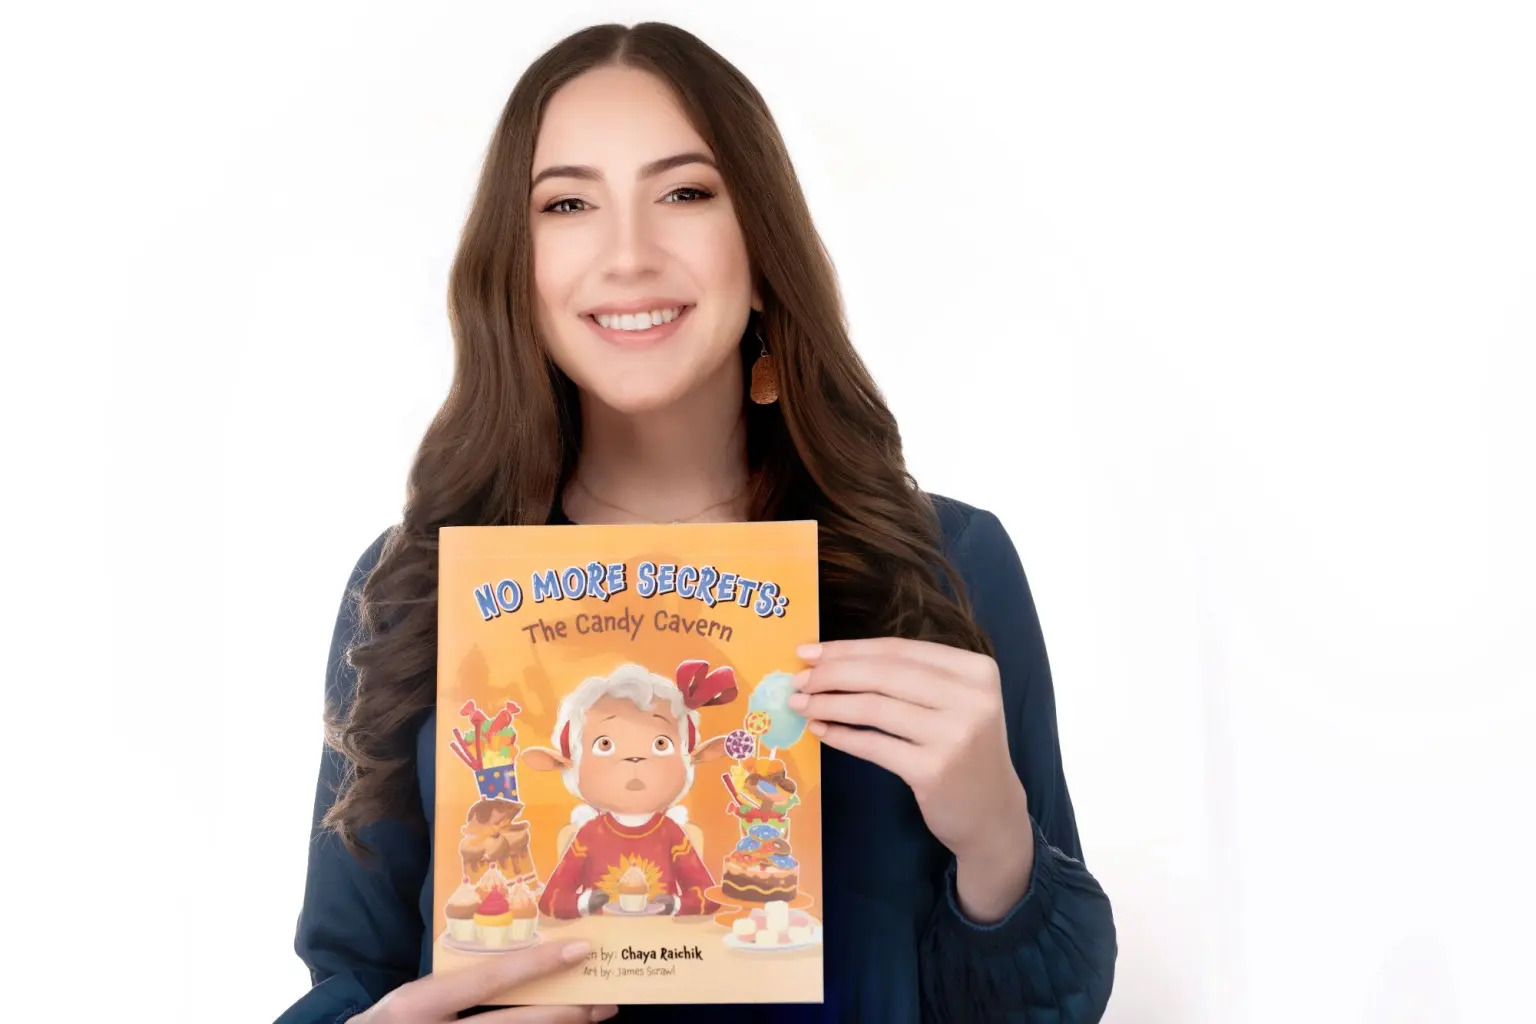 Libs of TikTok Creator to Protect Children From 'Breeding Grounds of Activism' With New Children's Book